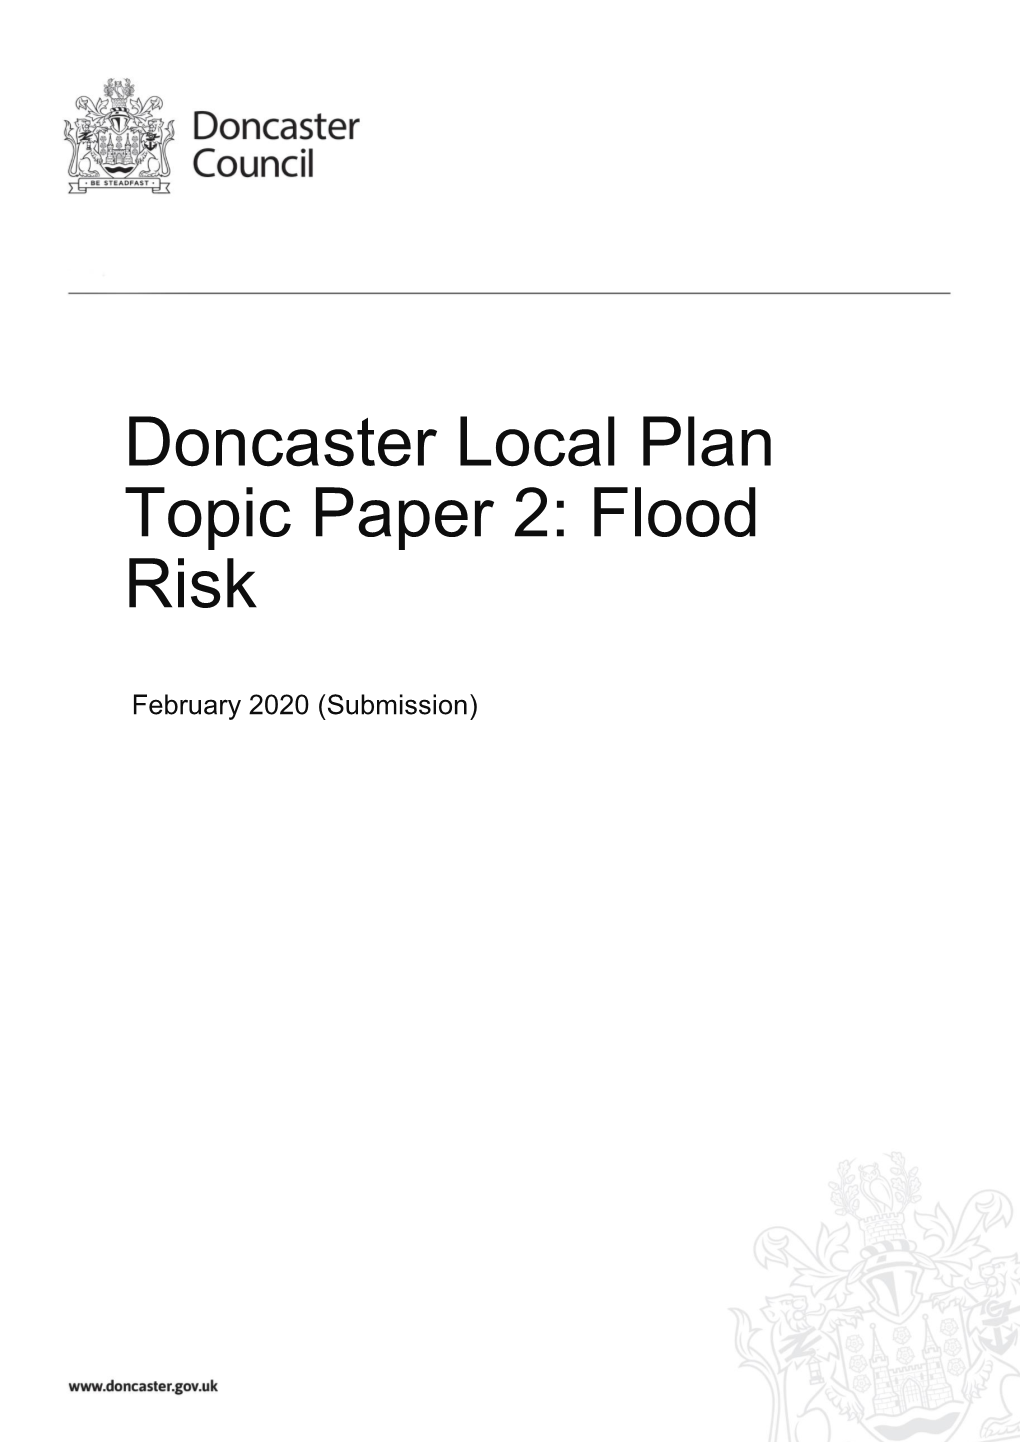 Doncaster Local Plan Topic Paper 2: Flood Risk